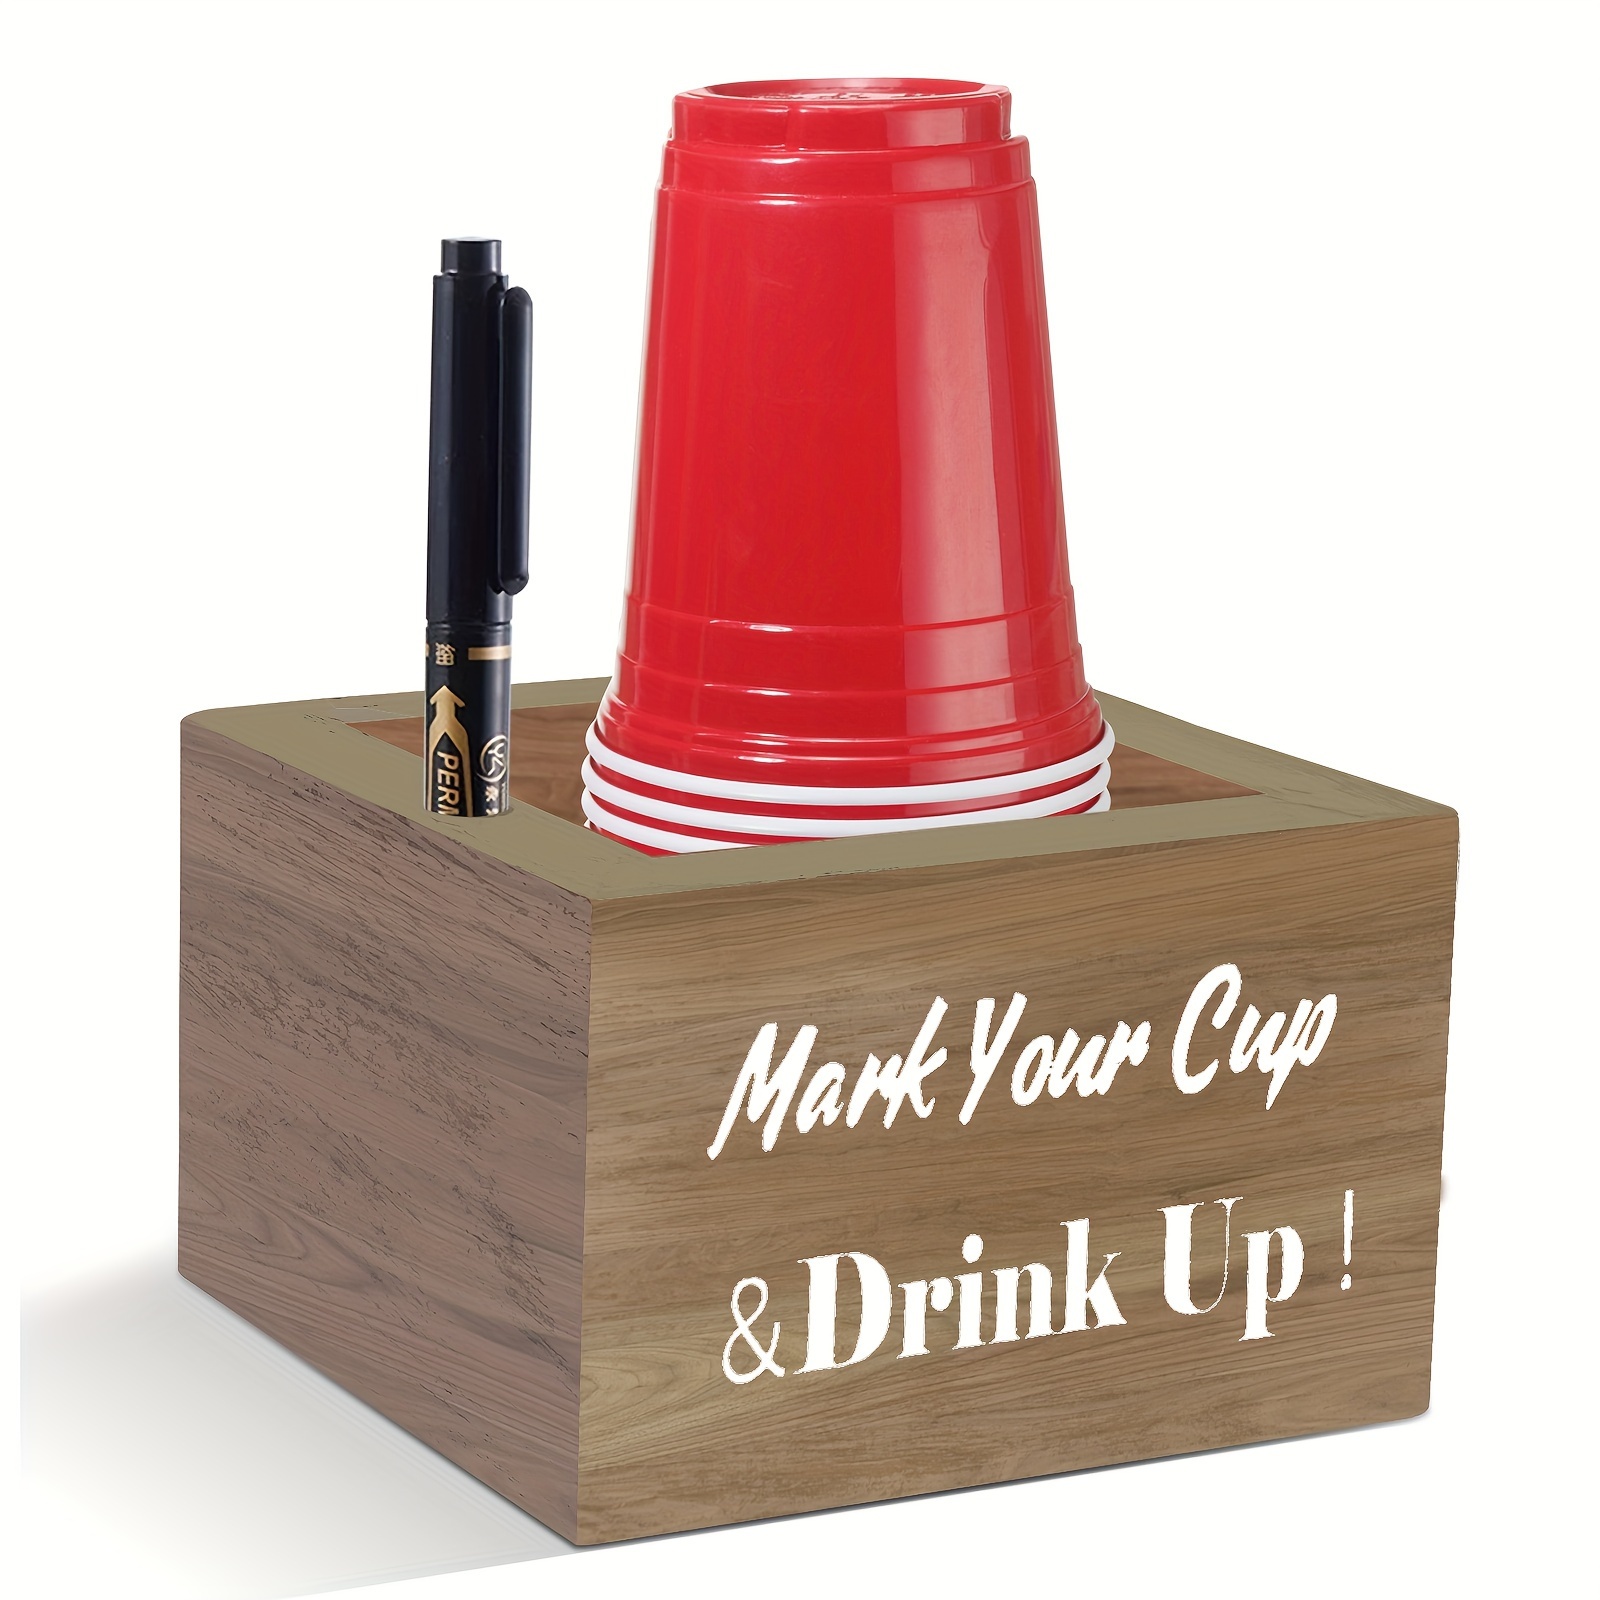  Double Solo Cup Holder with Marker Slot Wooden Mark Your Cup  and Drink Up 2 Sides Designs Drink Dispensers for Parties Farmhouse Bar  Christmas Housewarming Party Holiday Decor Hostess Gifts 